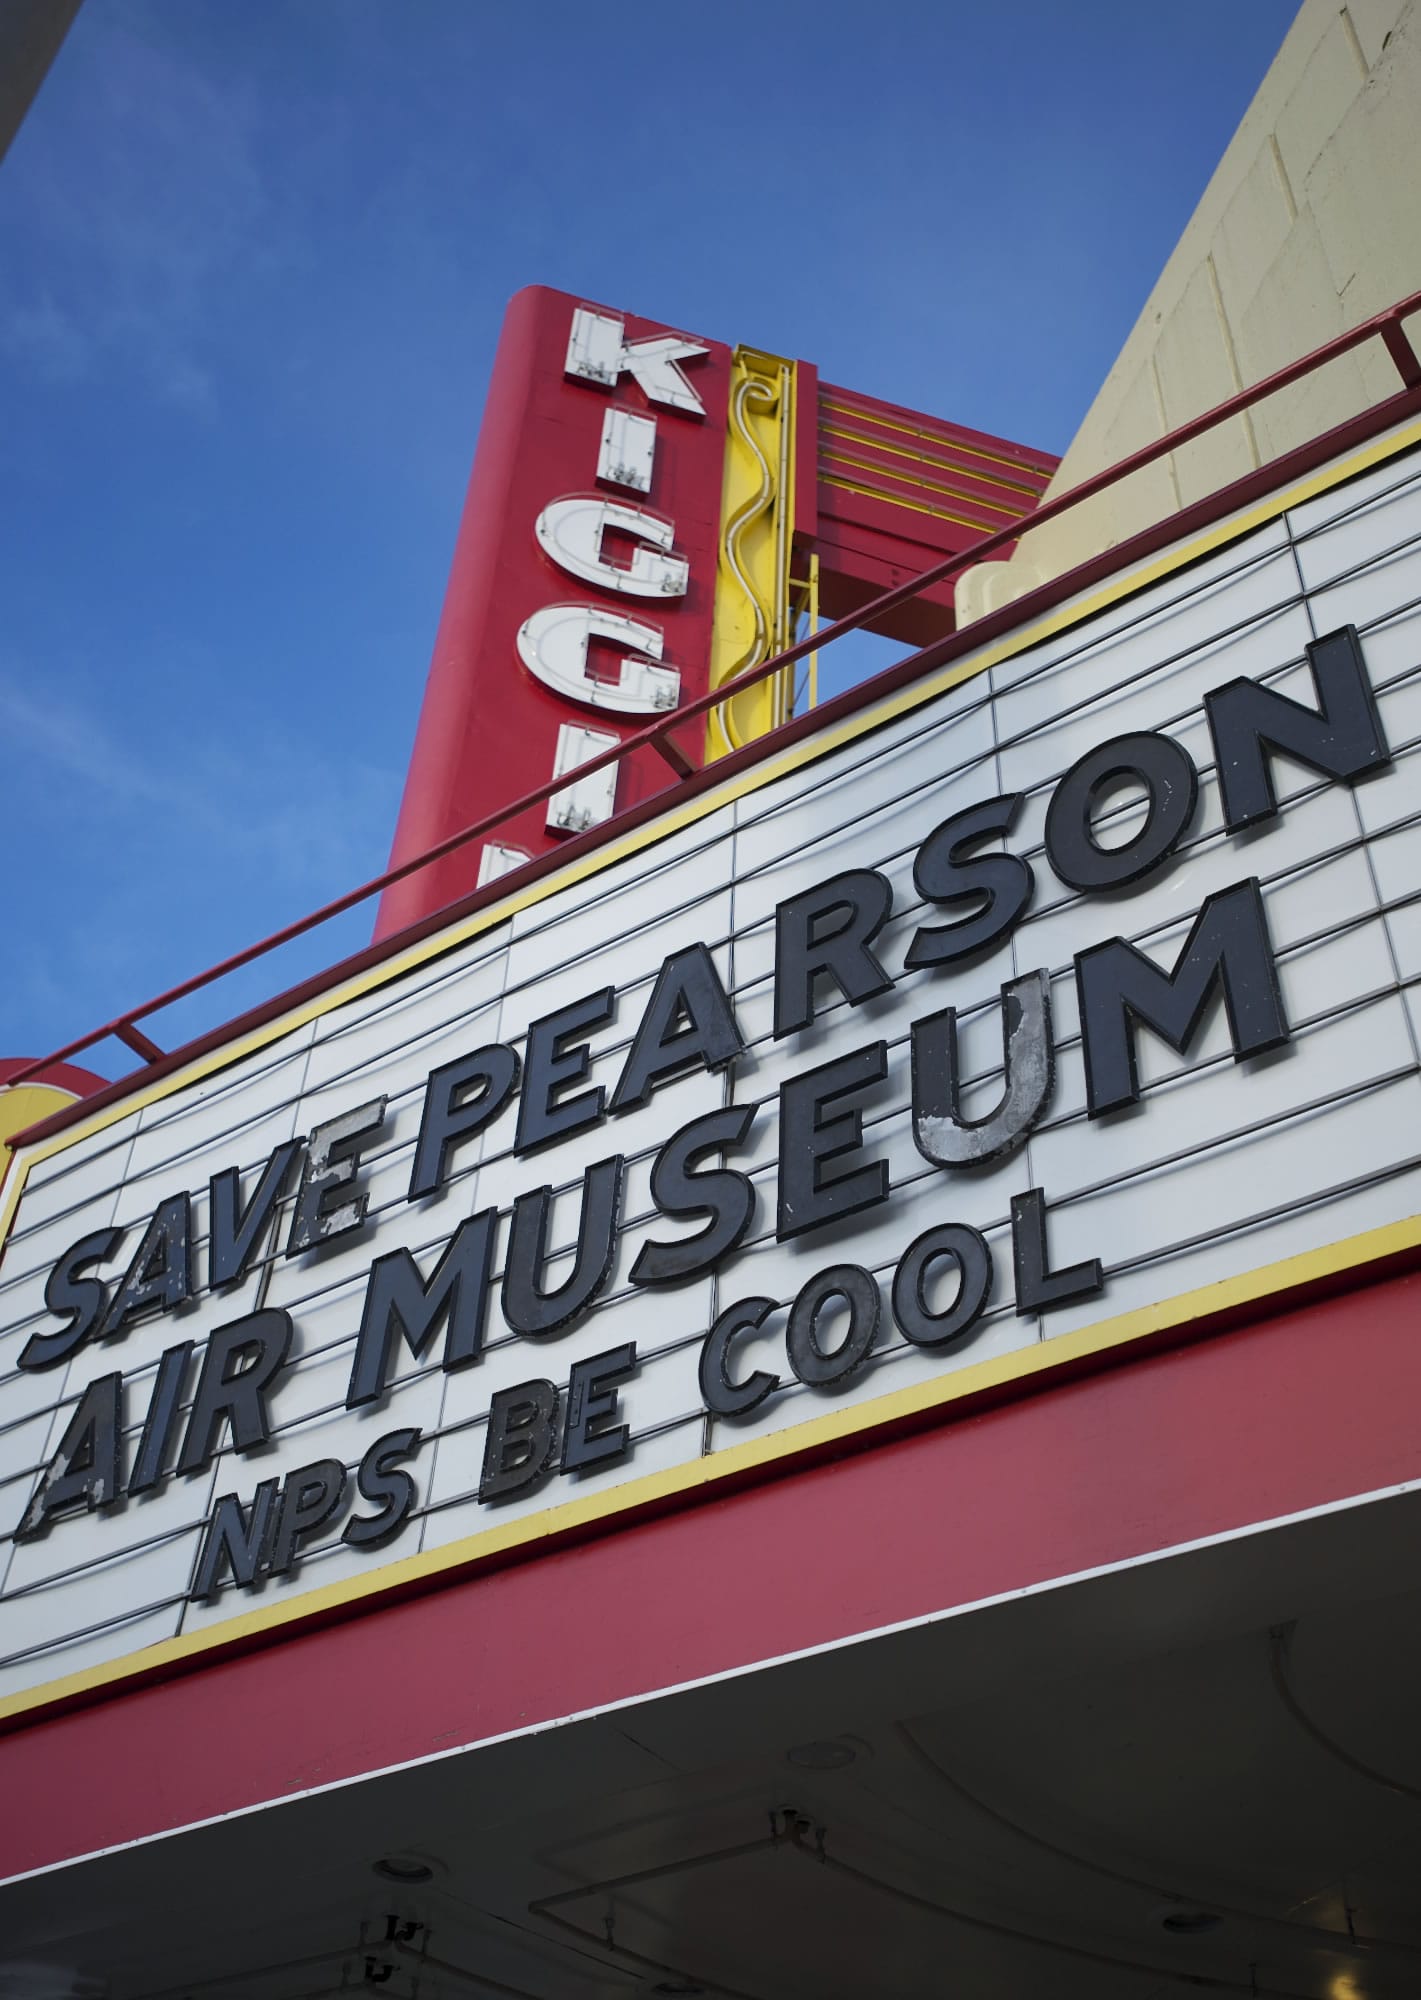 Kiggins Theatre showed its support for Pearson Air Museum by changing its sign Thursday.